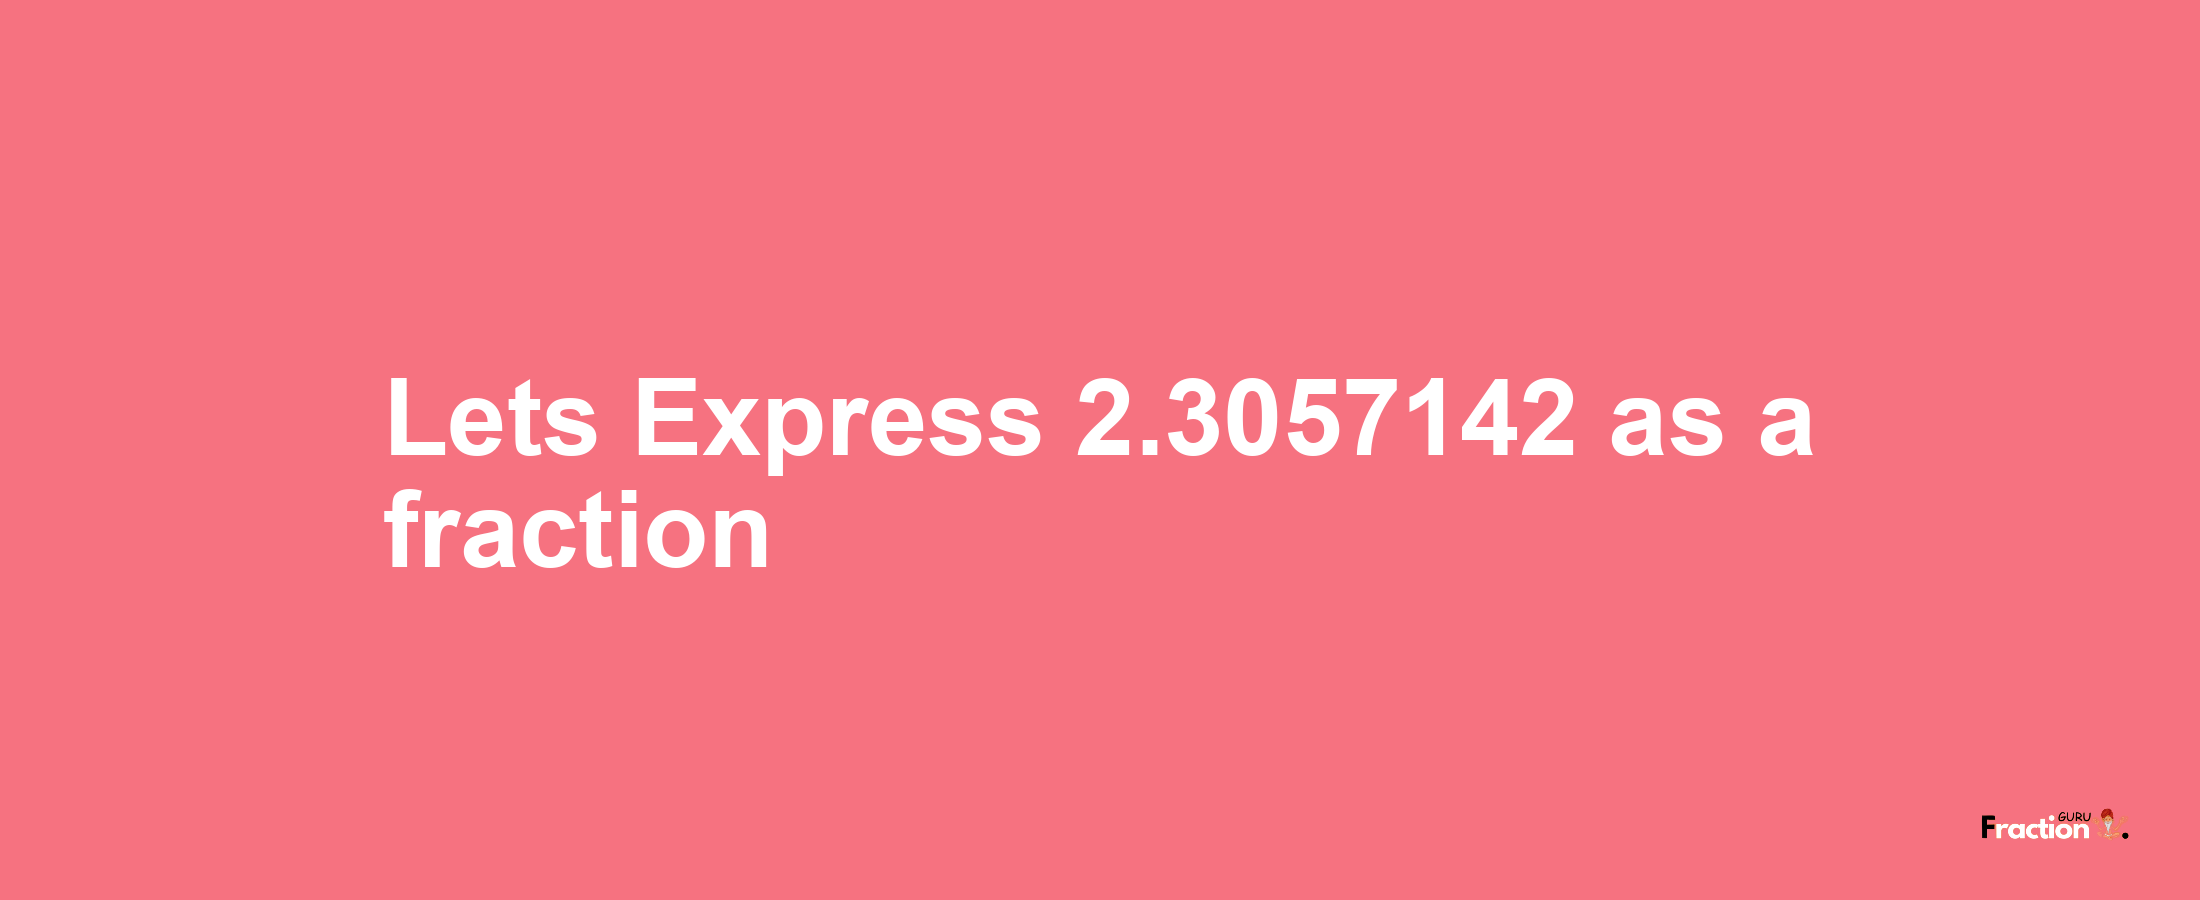 Lets Express 2.3057142 as afraction